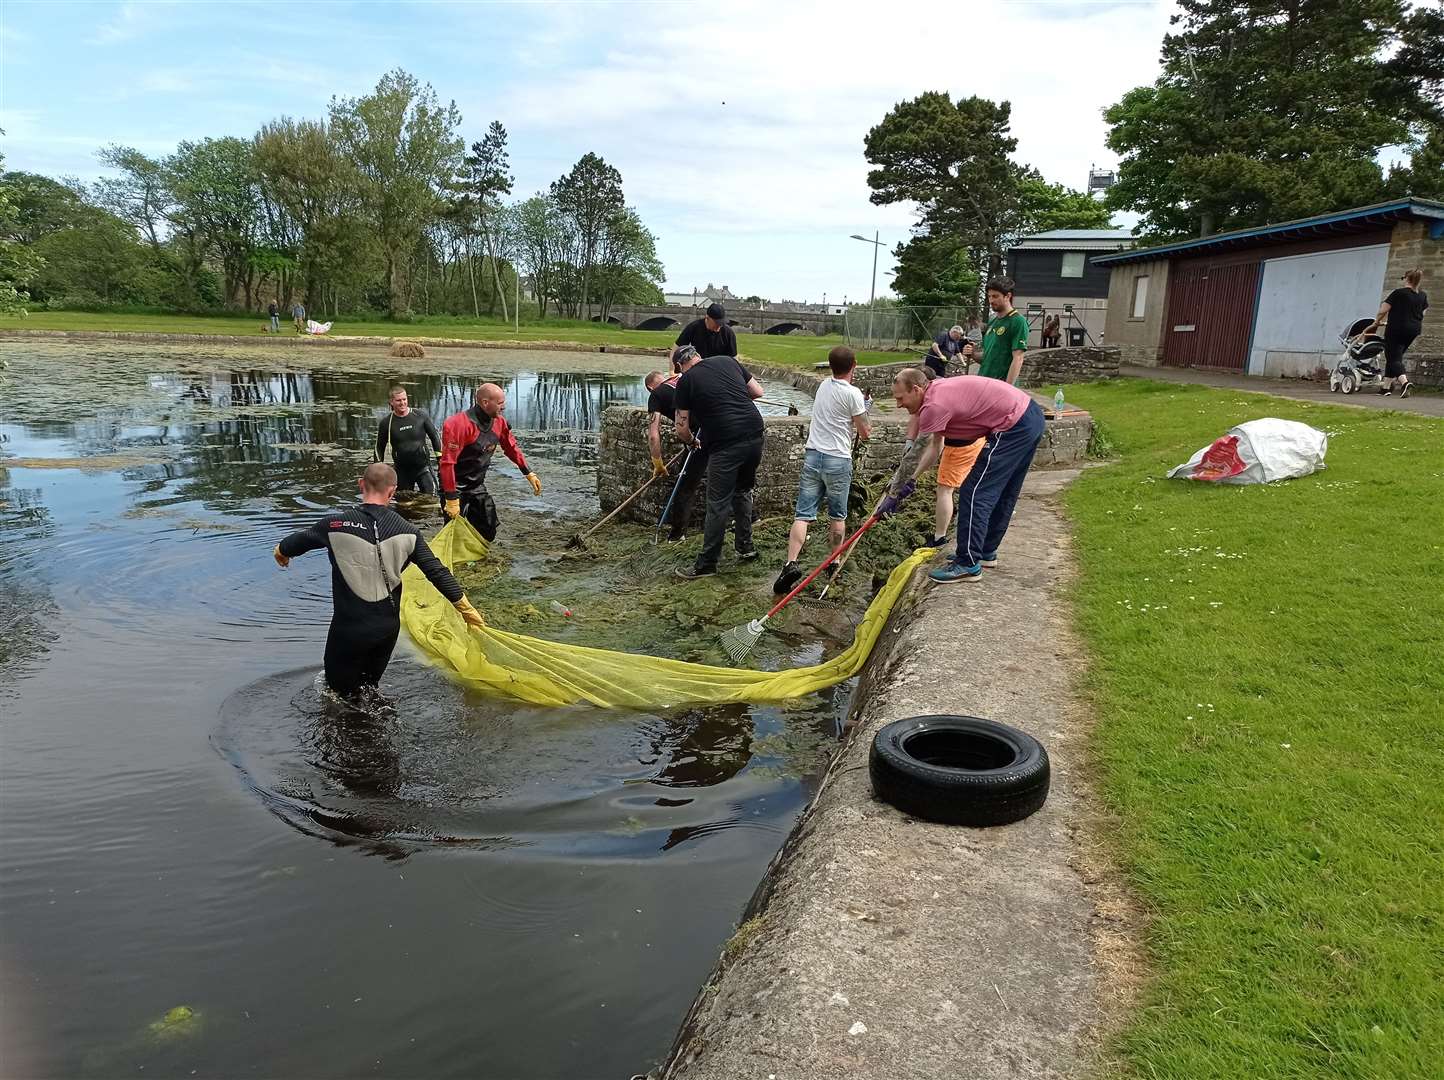 Volunteers used rakes and nets to clean the water and remove rubbish from the boating pond. Picture: Ron Gunn